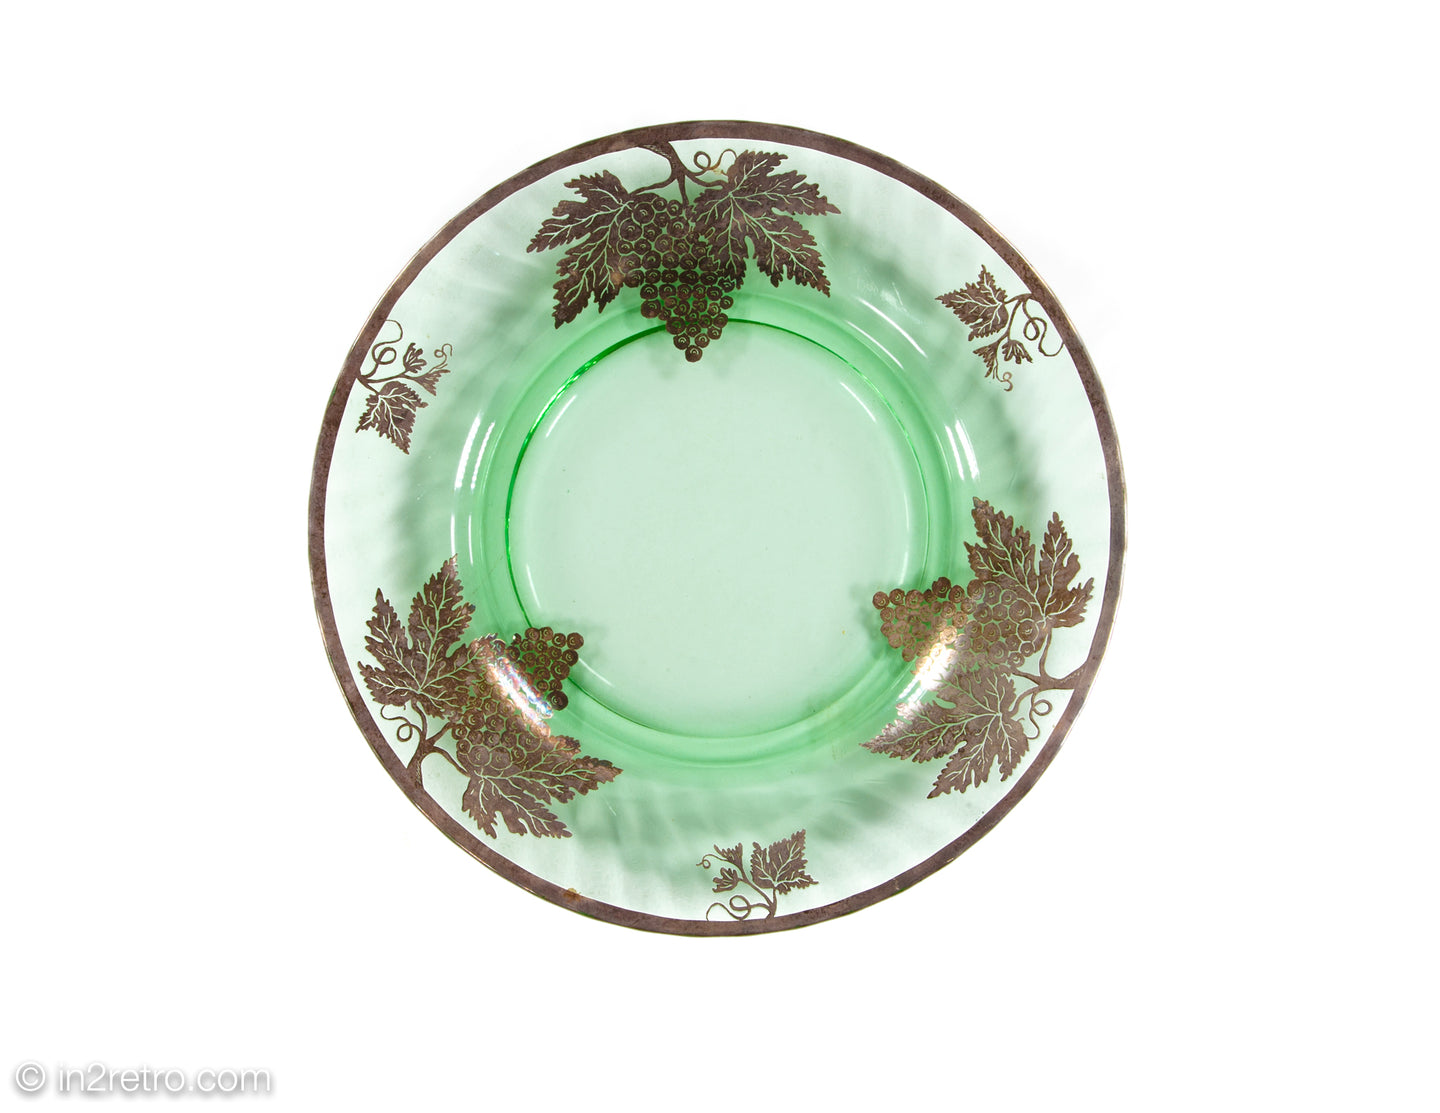 RARE VINTAGE GREEN GLASS WITH SILVER OVERLAY DESSERT PLATE WITH GRAPES & LEAVES MOTIF